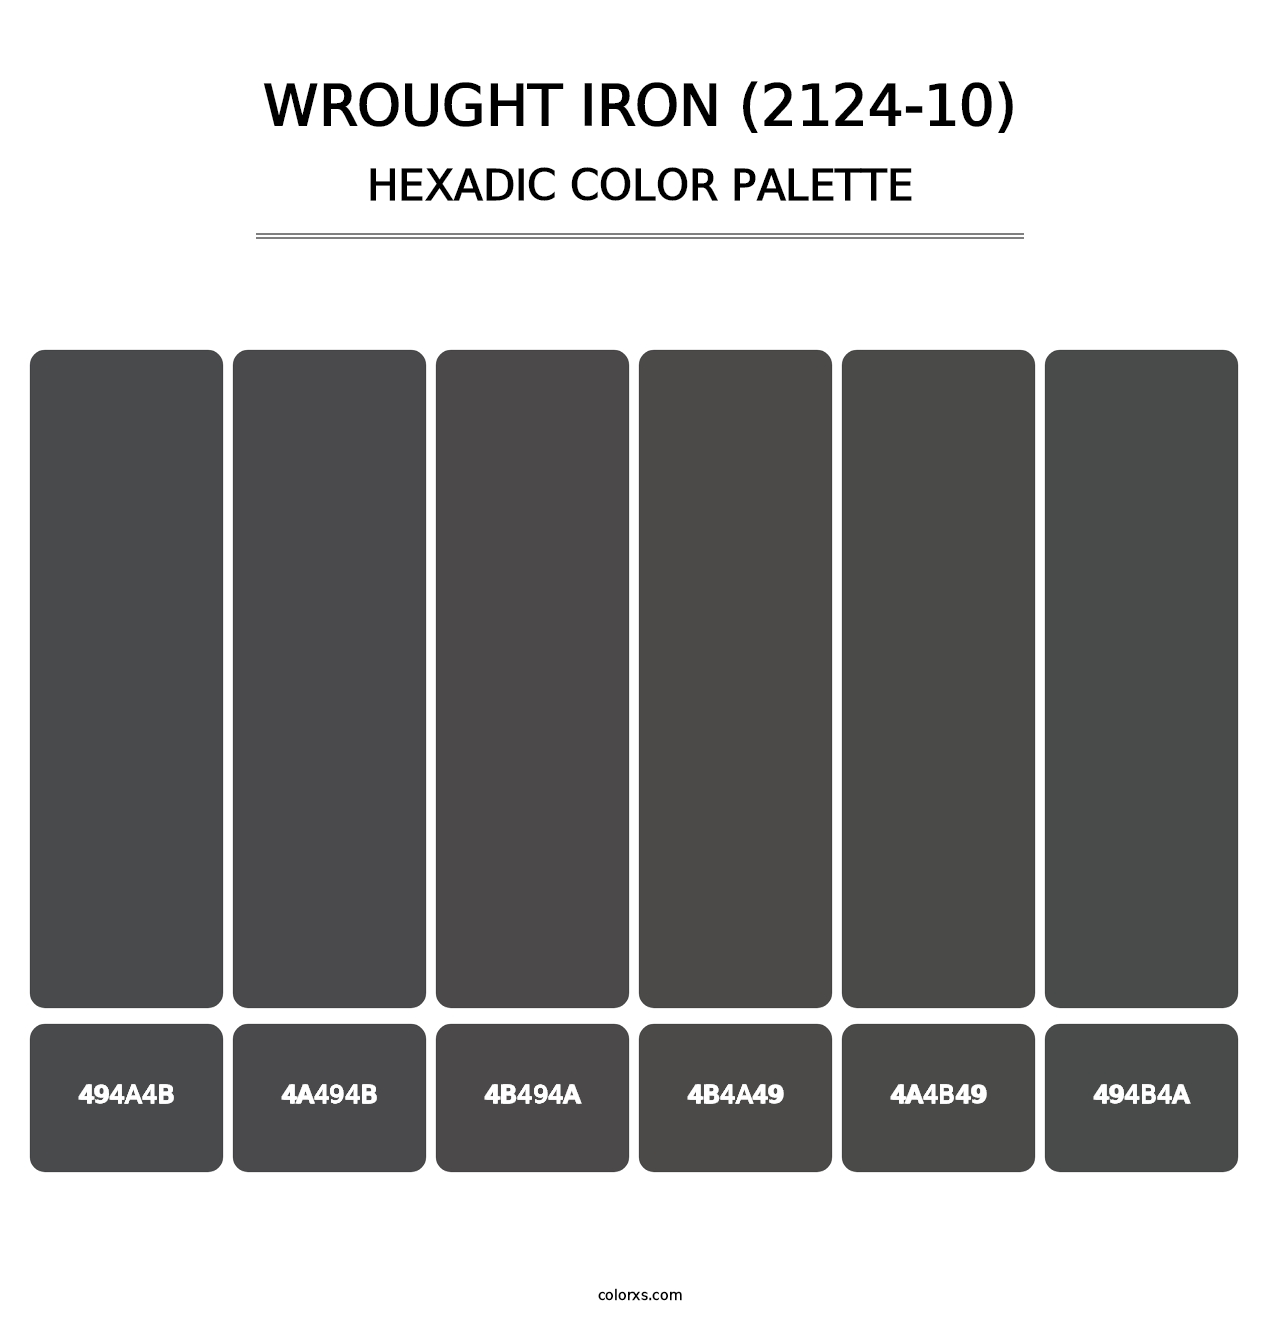 Wrought Iron (2124-10) - Hexadic Color Palette